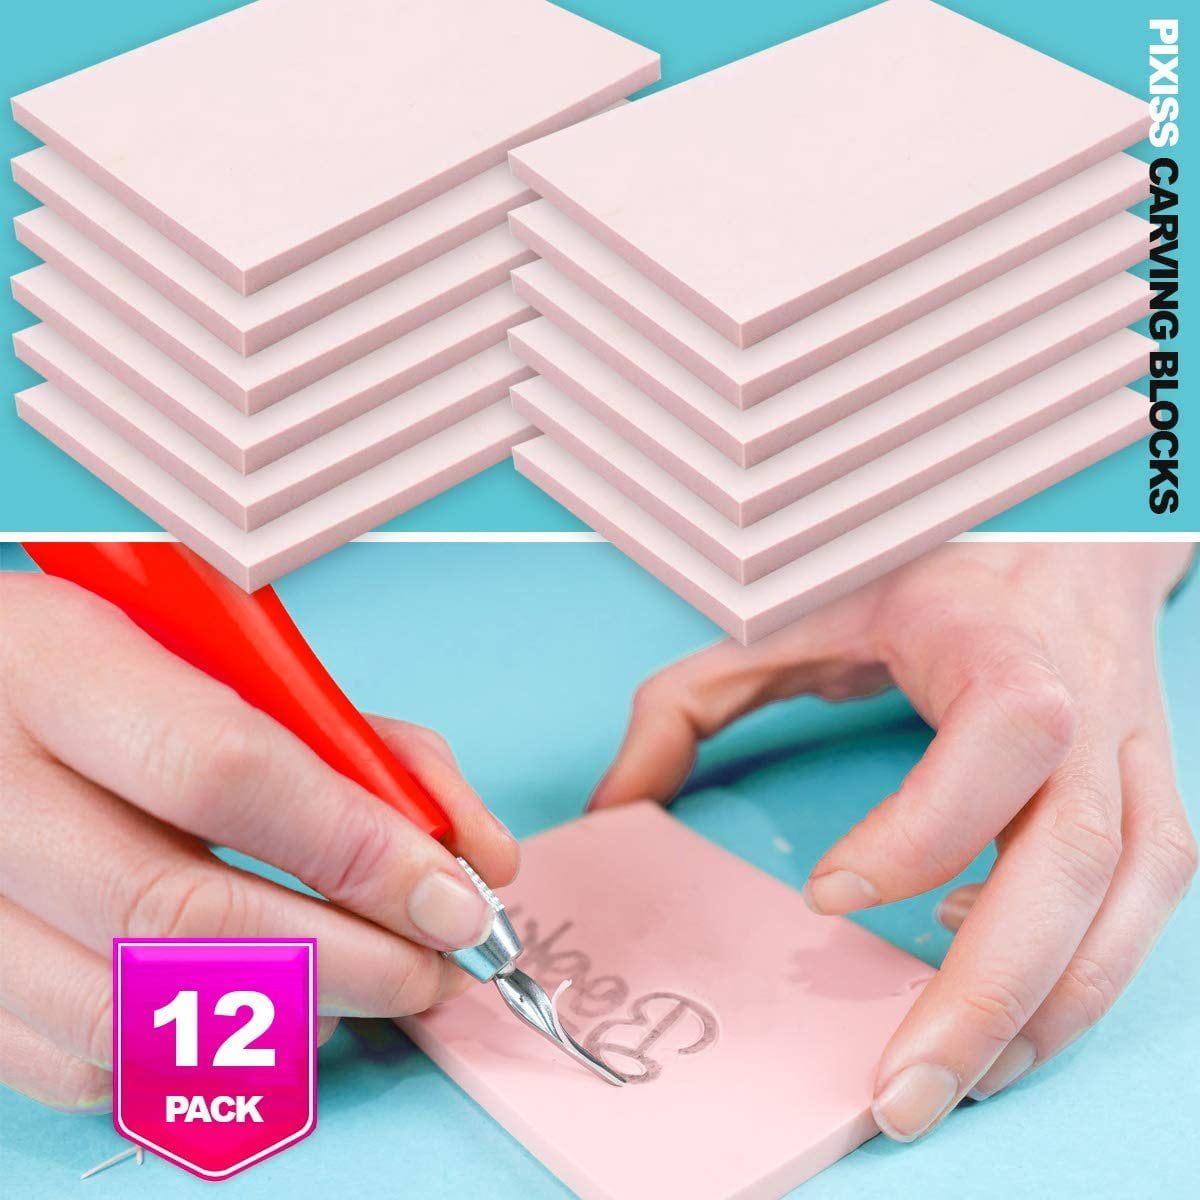 Incraftables Rubber Stamp Kit 5-Pack Linoleum Block Kit w/ Cutting Blades Tools 6pcs Block Printing Kit (6in x 4in x ¼ in) Pink